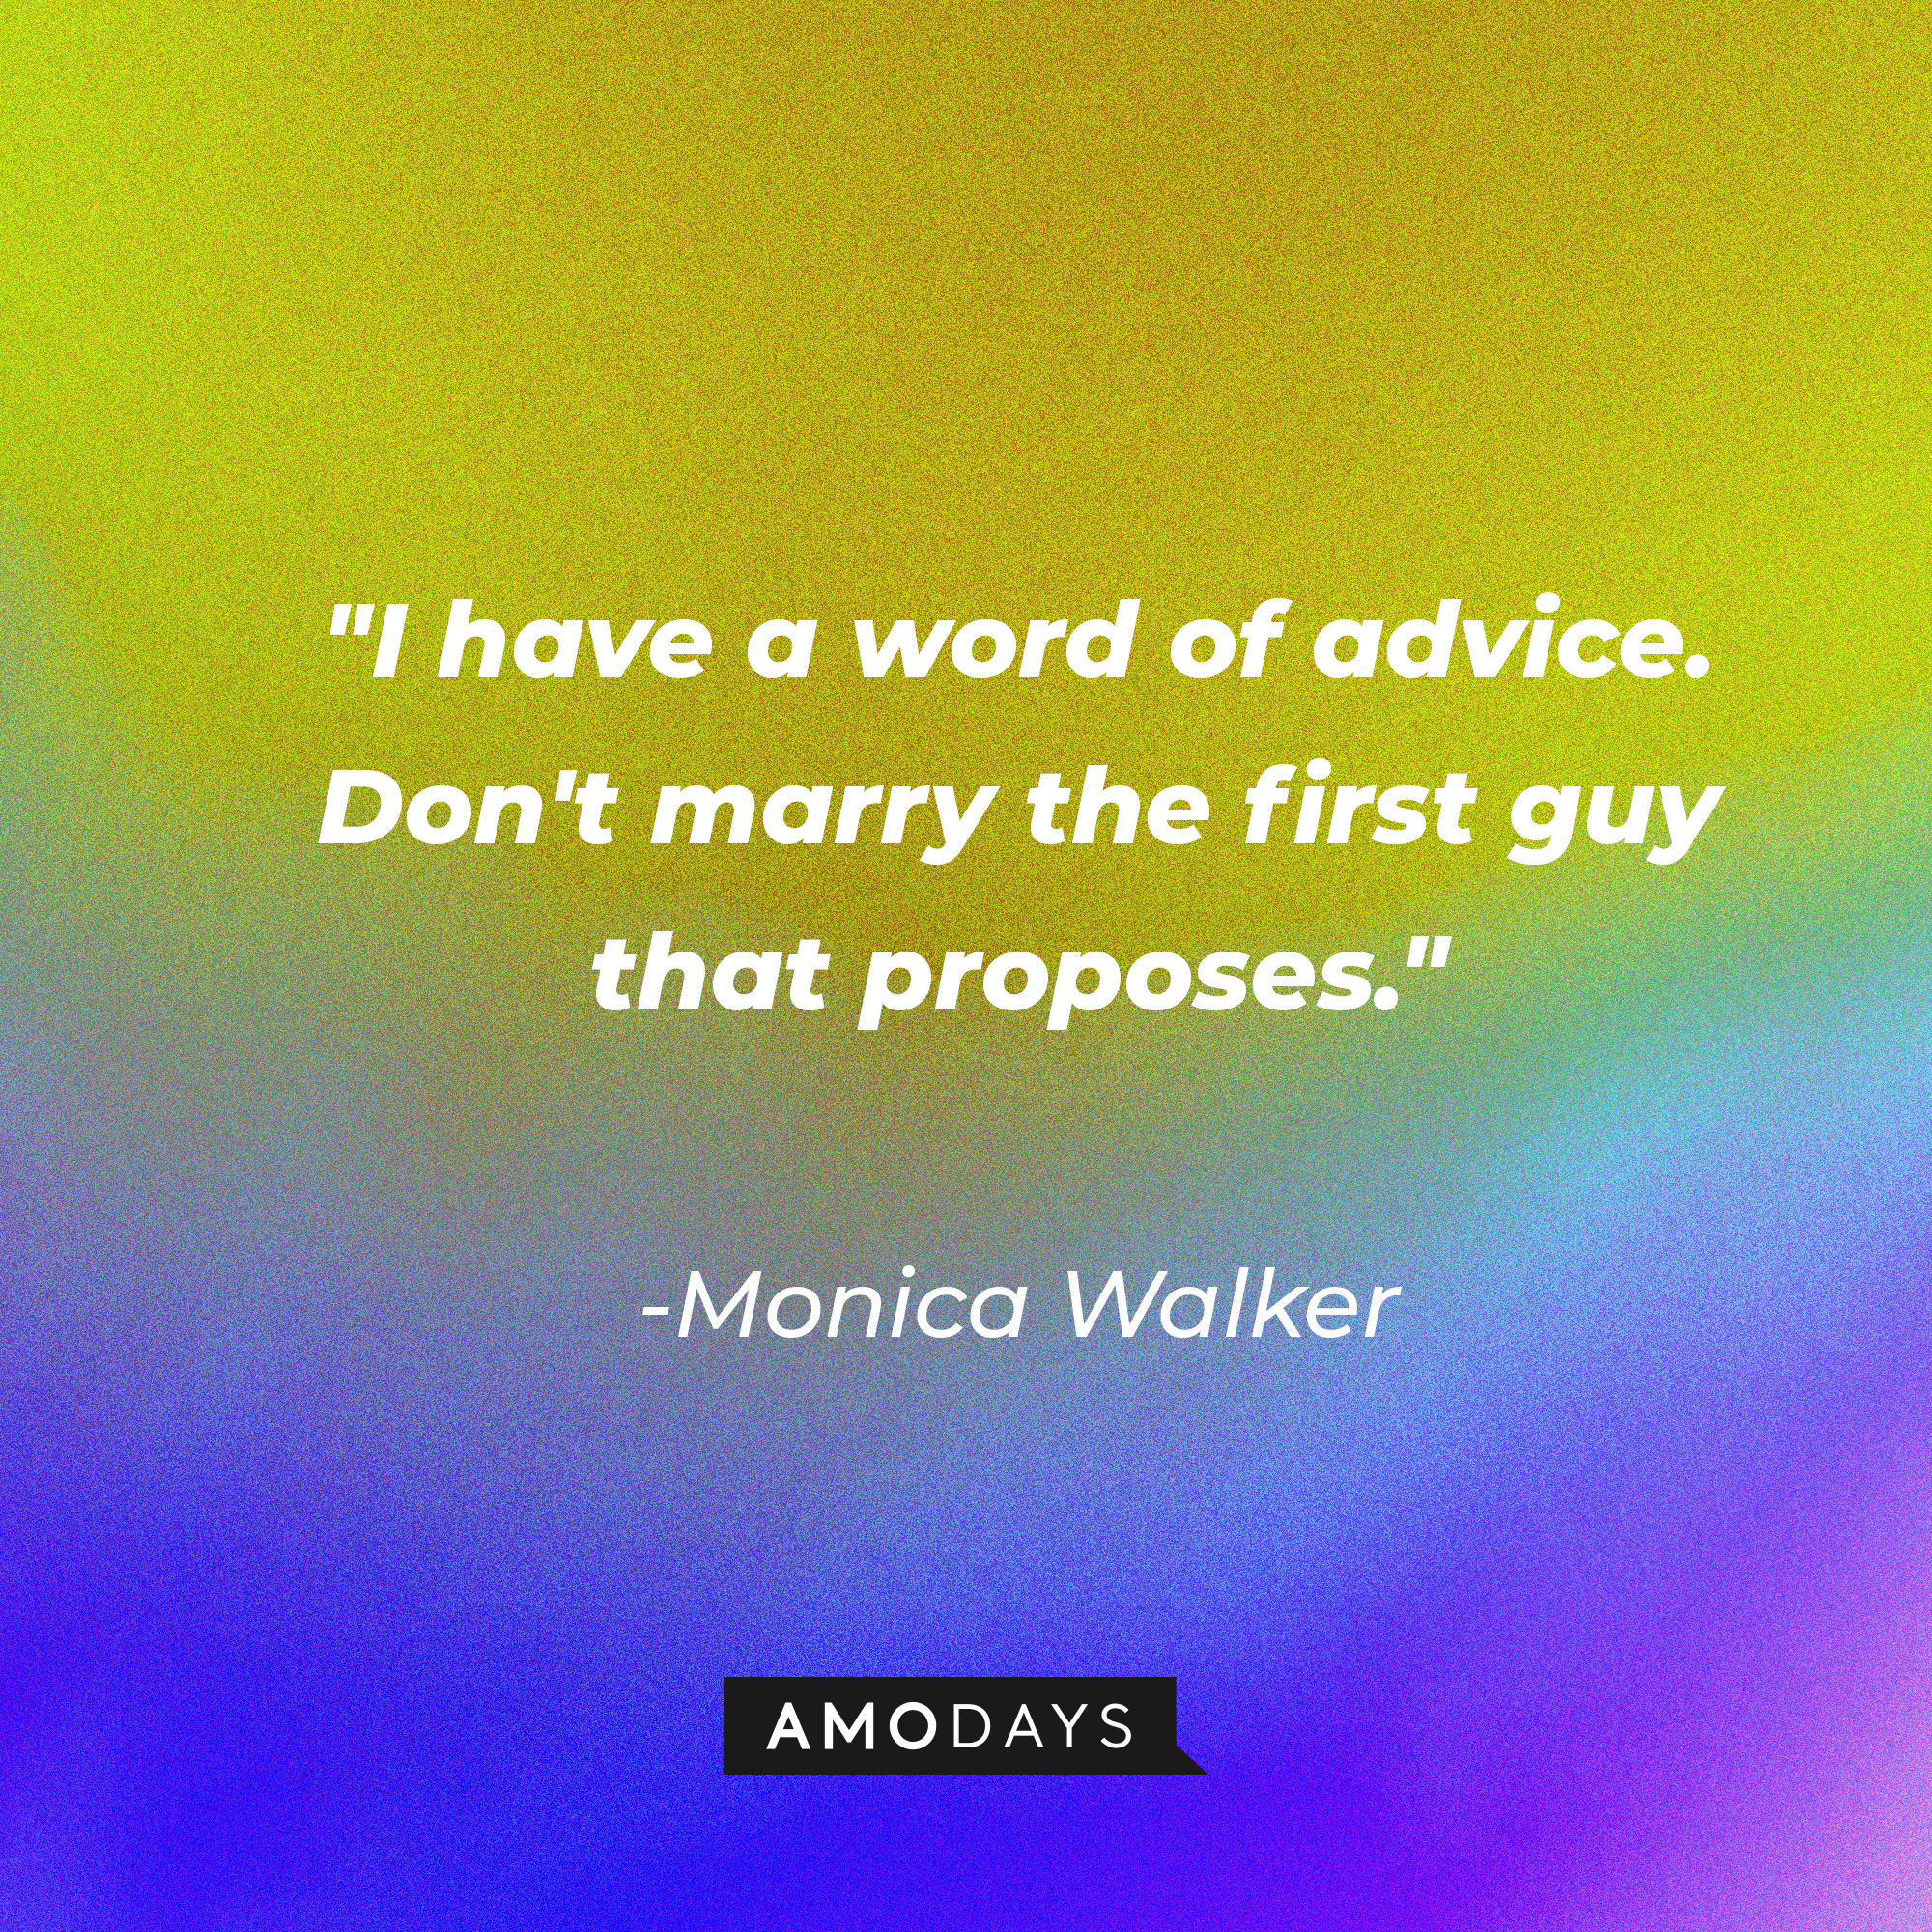 Monica Walker's quote: "I have a word of advice. Don't marry the first guy that proposes." | Source: AmoDays